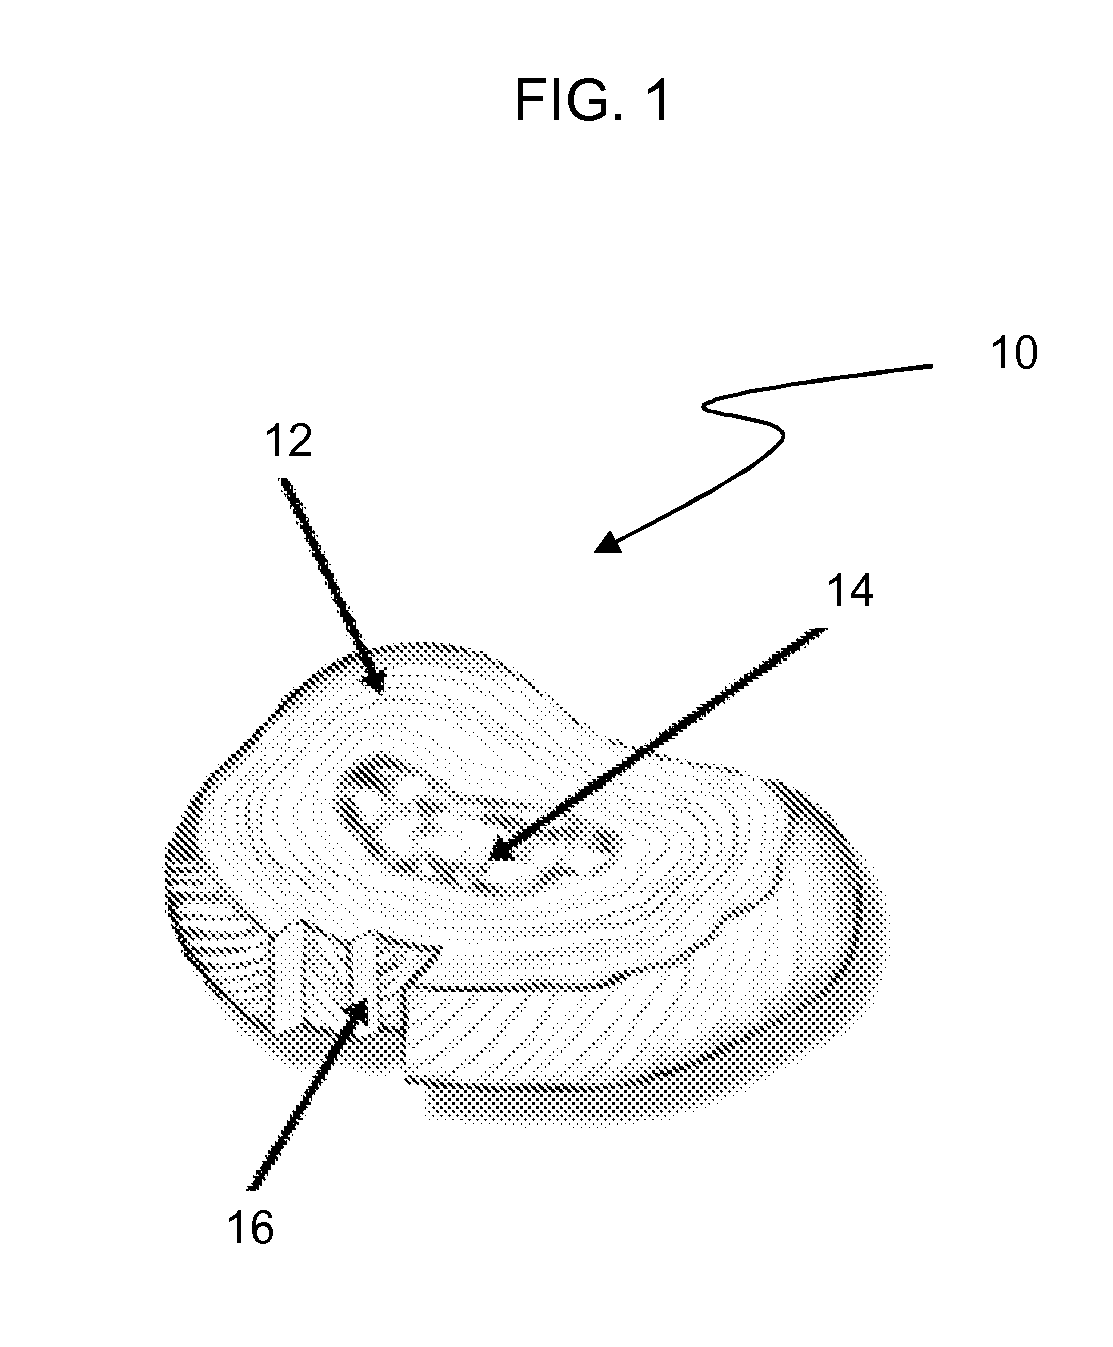 Minimally Invasive Tissue Modification Systems With Integrated Visualization